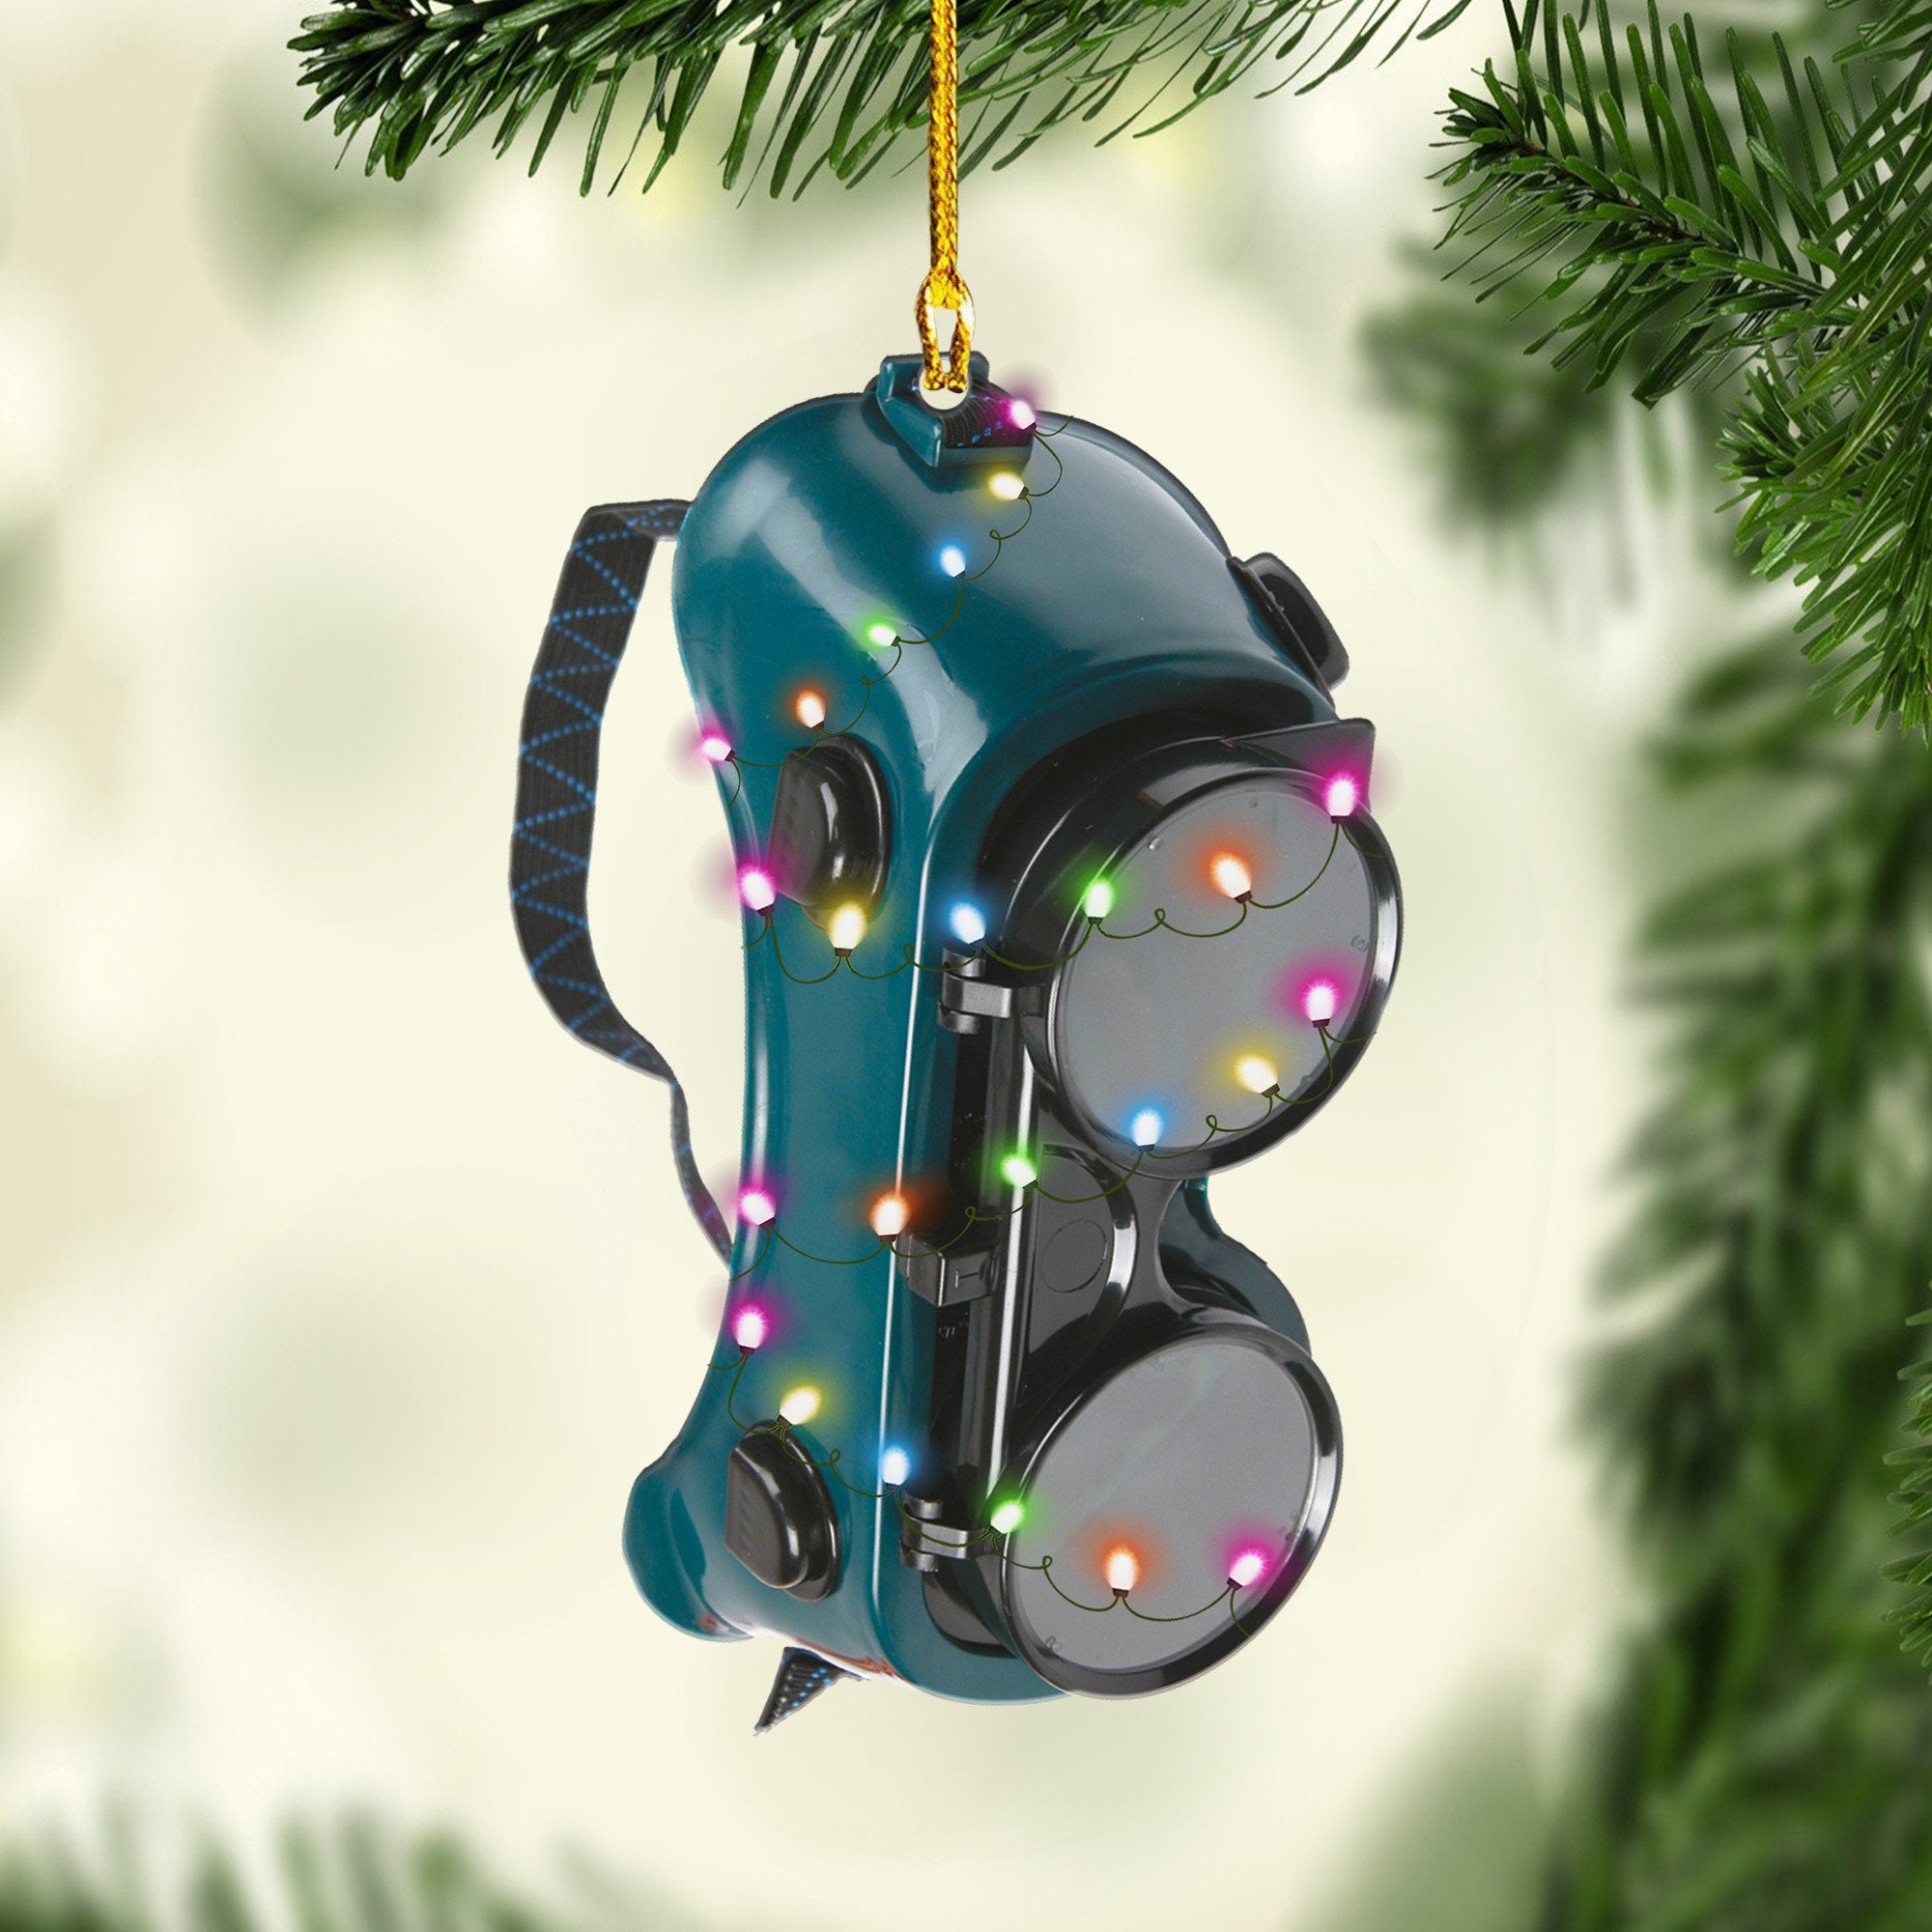 Welder Tool Shaped Acrylic Ornaments/ Gift for Welder Christmas. Idea Gift for Welder